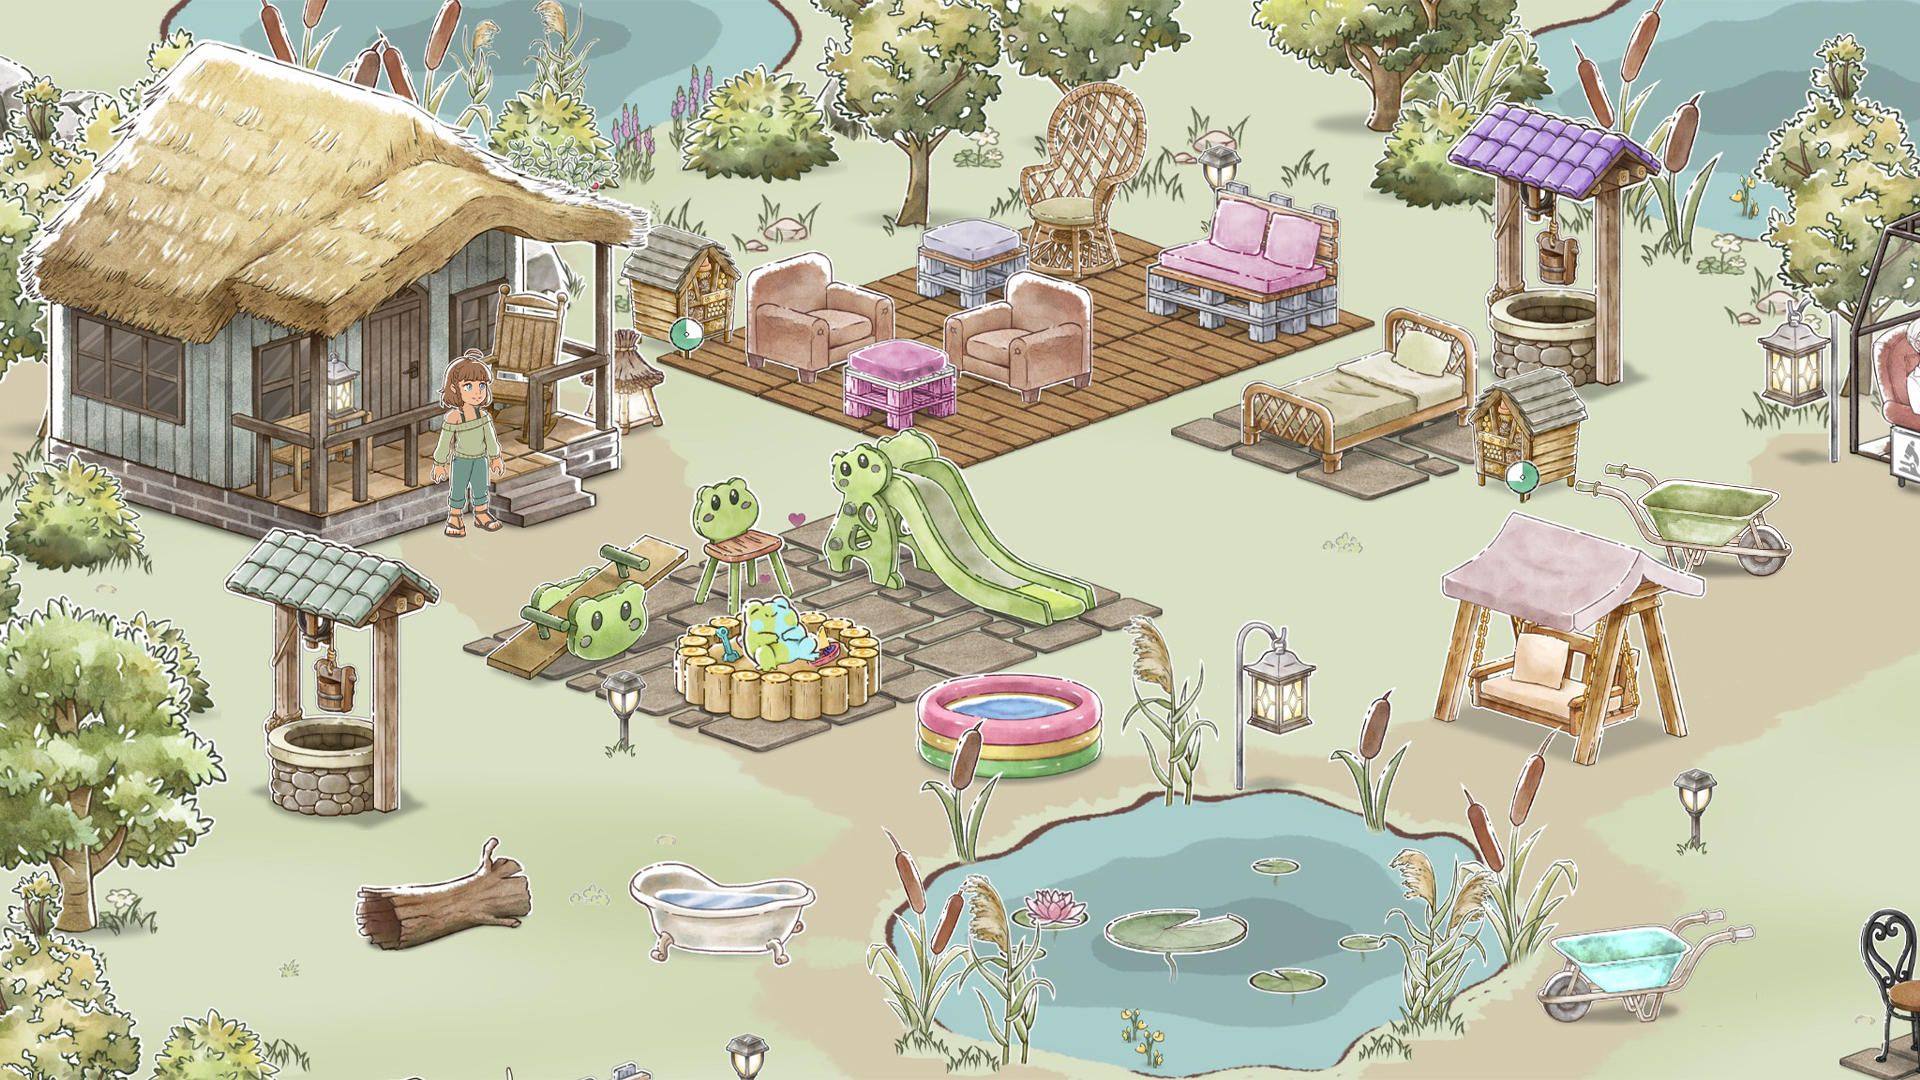 A screenshot from Kamaeru: A Frog Refuge, provided to the press from the developer and/or publisher. A girl with a brown bob and a green sweater stands in front of a small, wooden, house-like structure. Around her is lots of lawn covered with various types of furniture, and a single frog lounging. There is a pond toward the bottom.